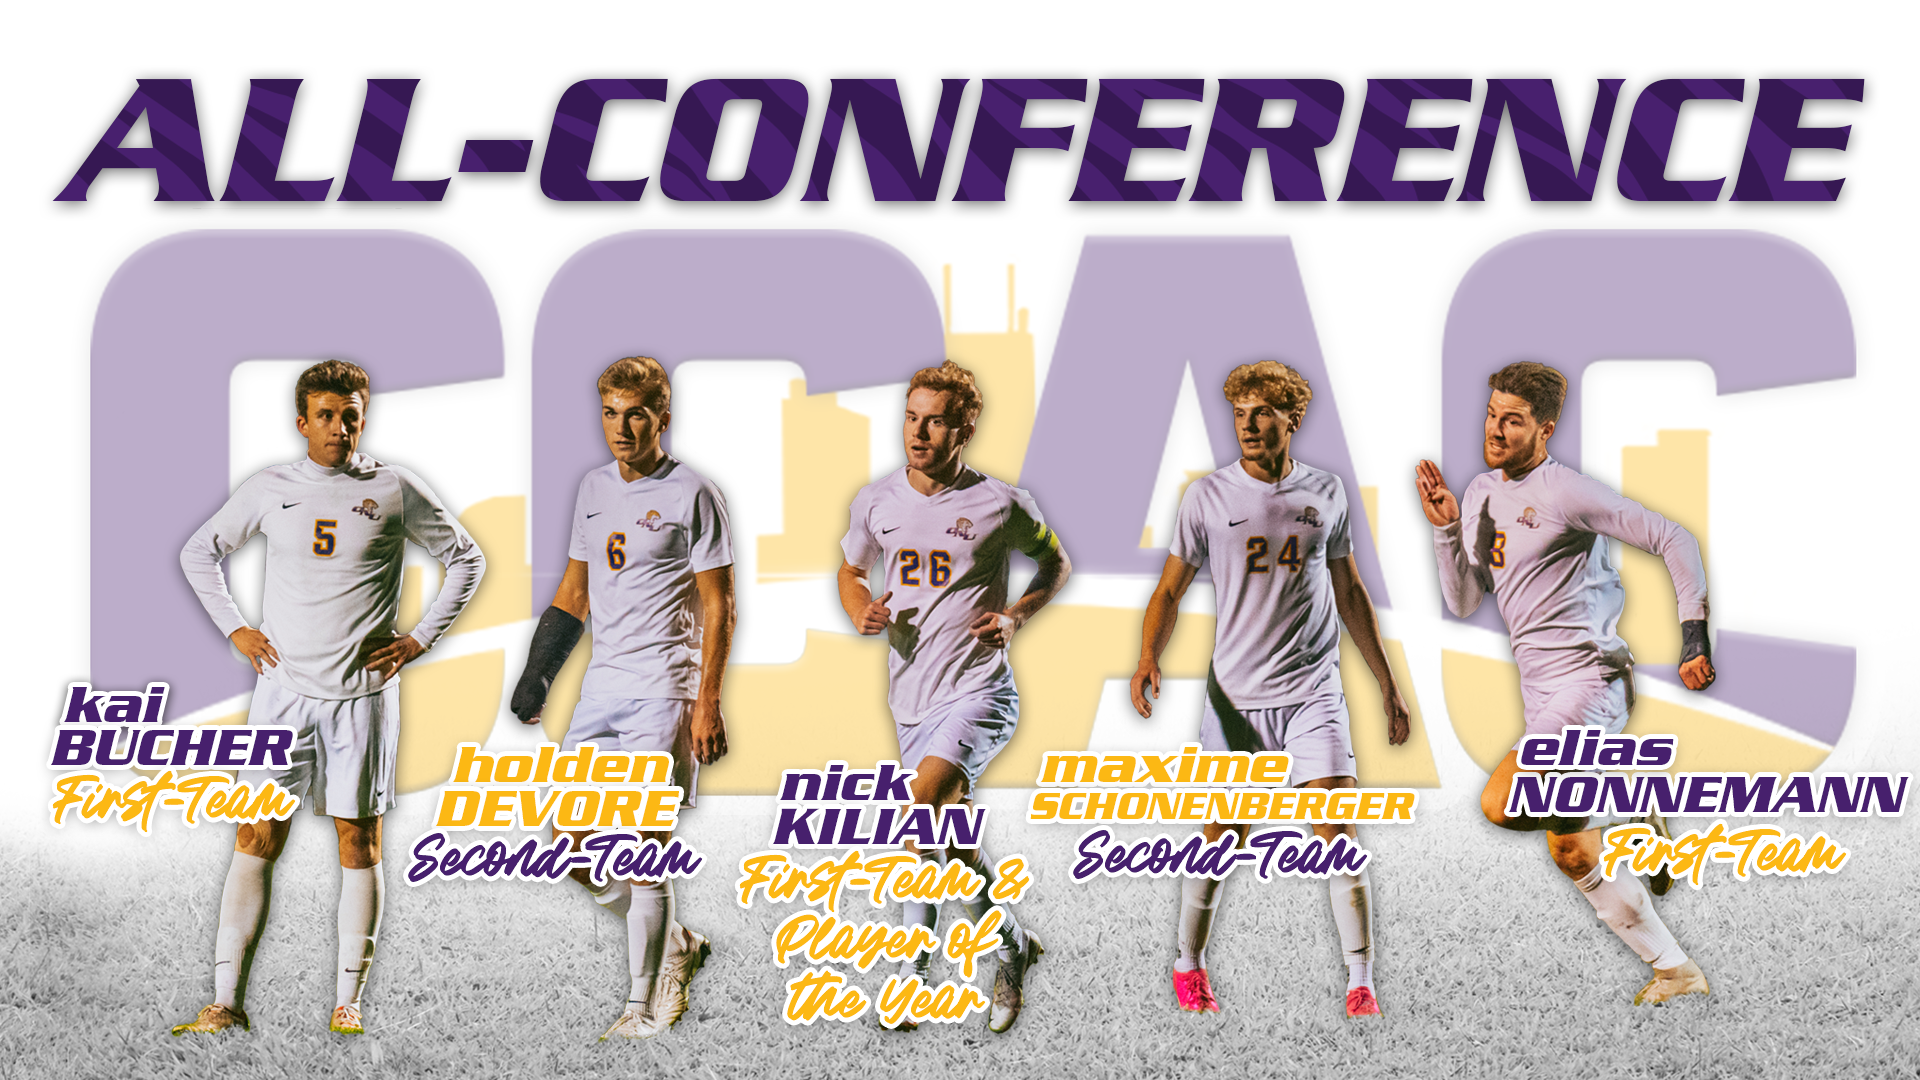 KILIAN NAMED CCAC PLAYER OF THE YEAR, FOUR OTHER TIGERS EARN ALL-CONFERENCE HONORS